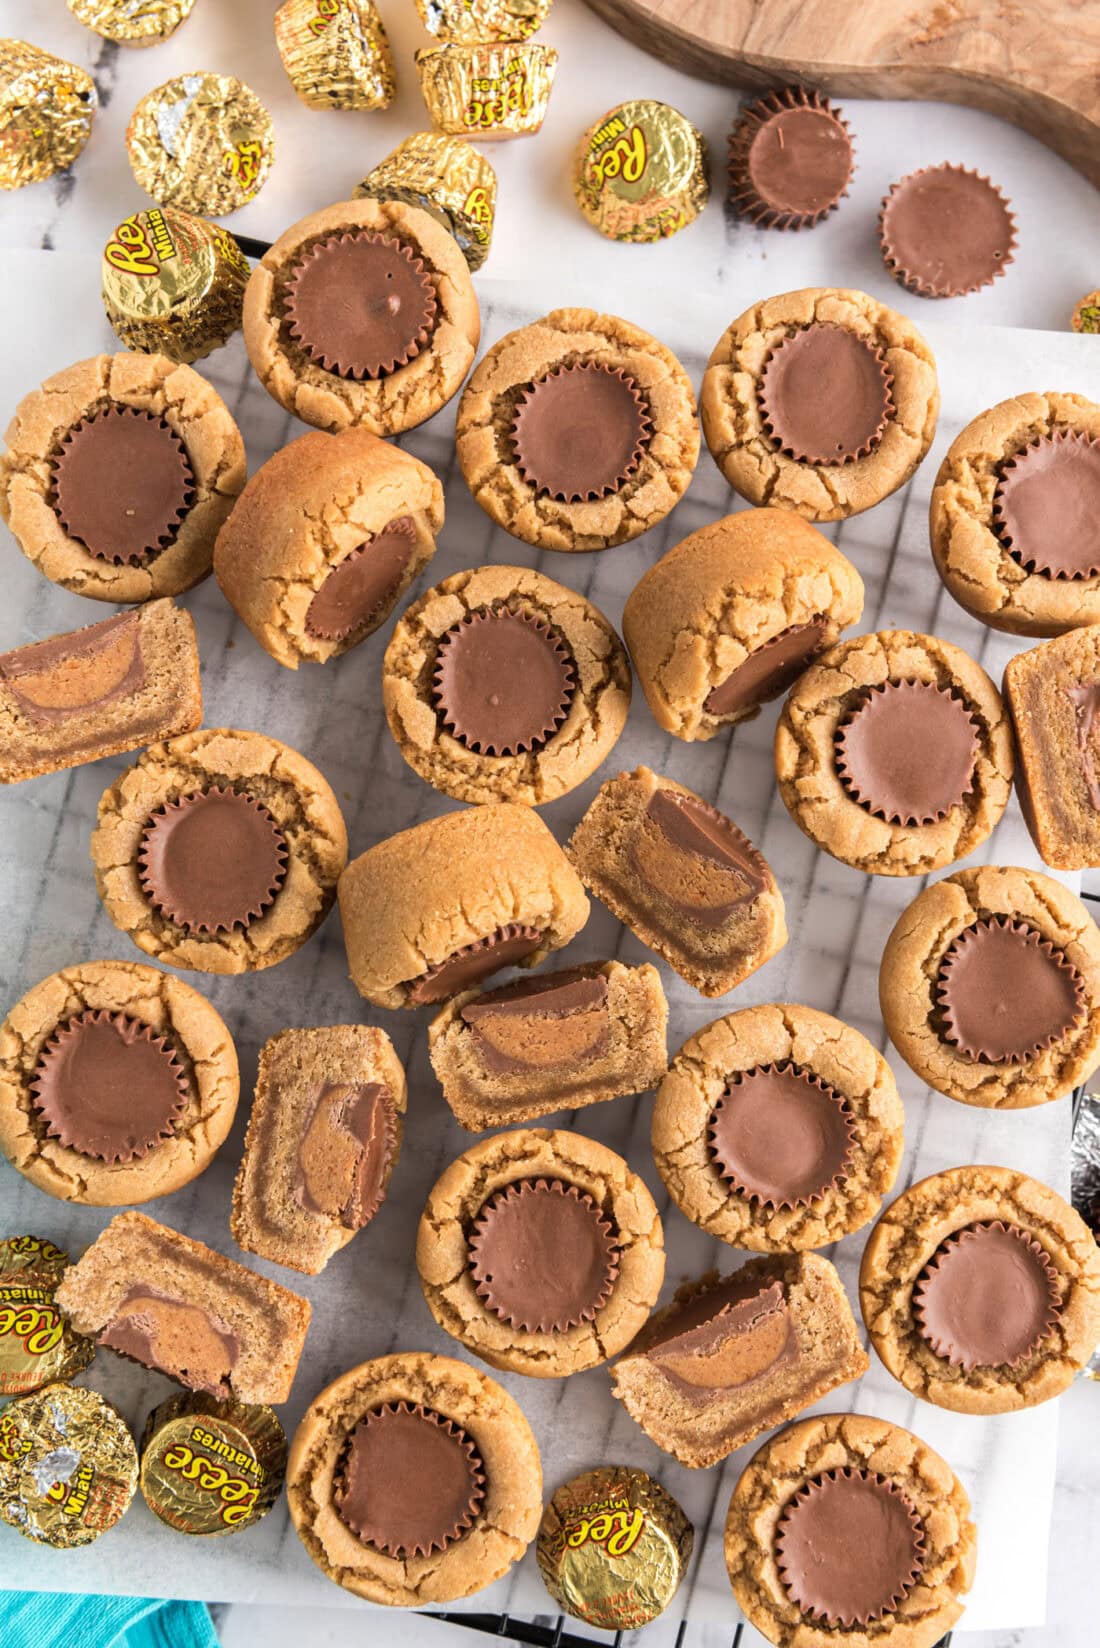 Reese’s Peanut Butter Cup Cookies on a wire rack 